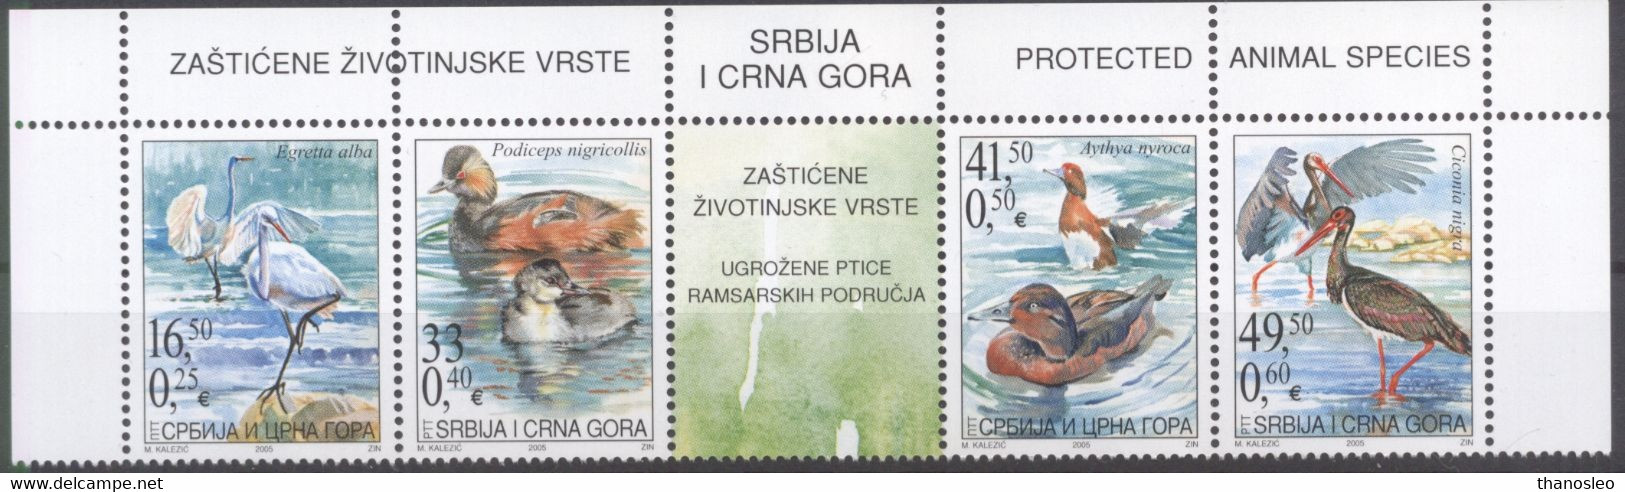 Serbia And Montenegro 2005  Protected Animal Species MNH VF - Serbia